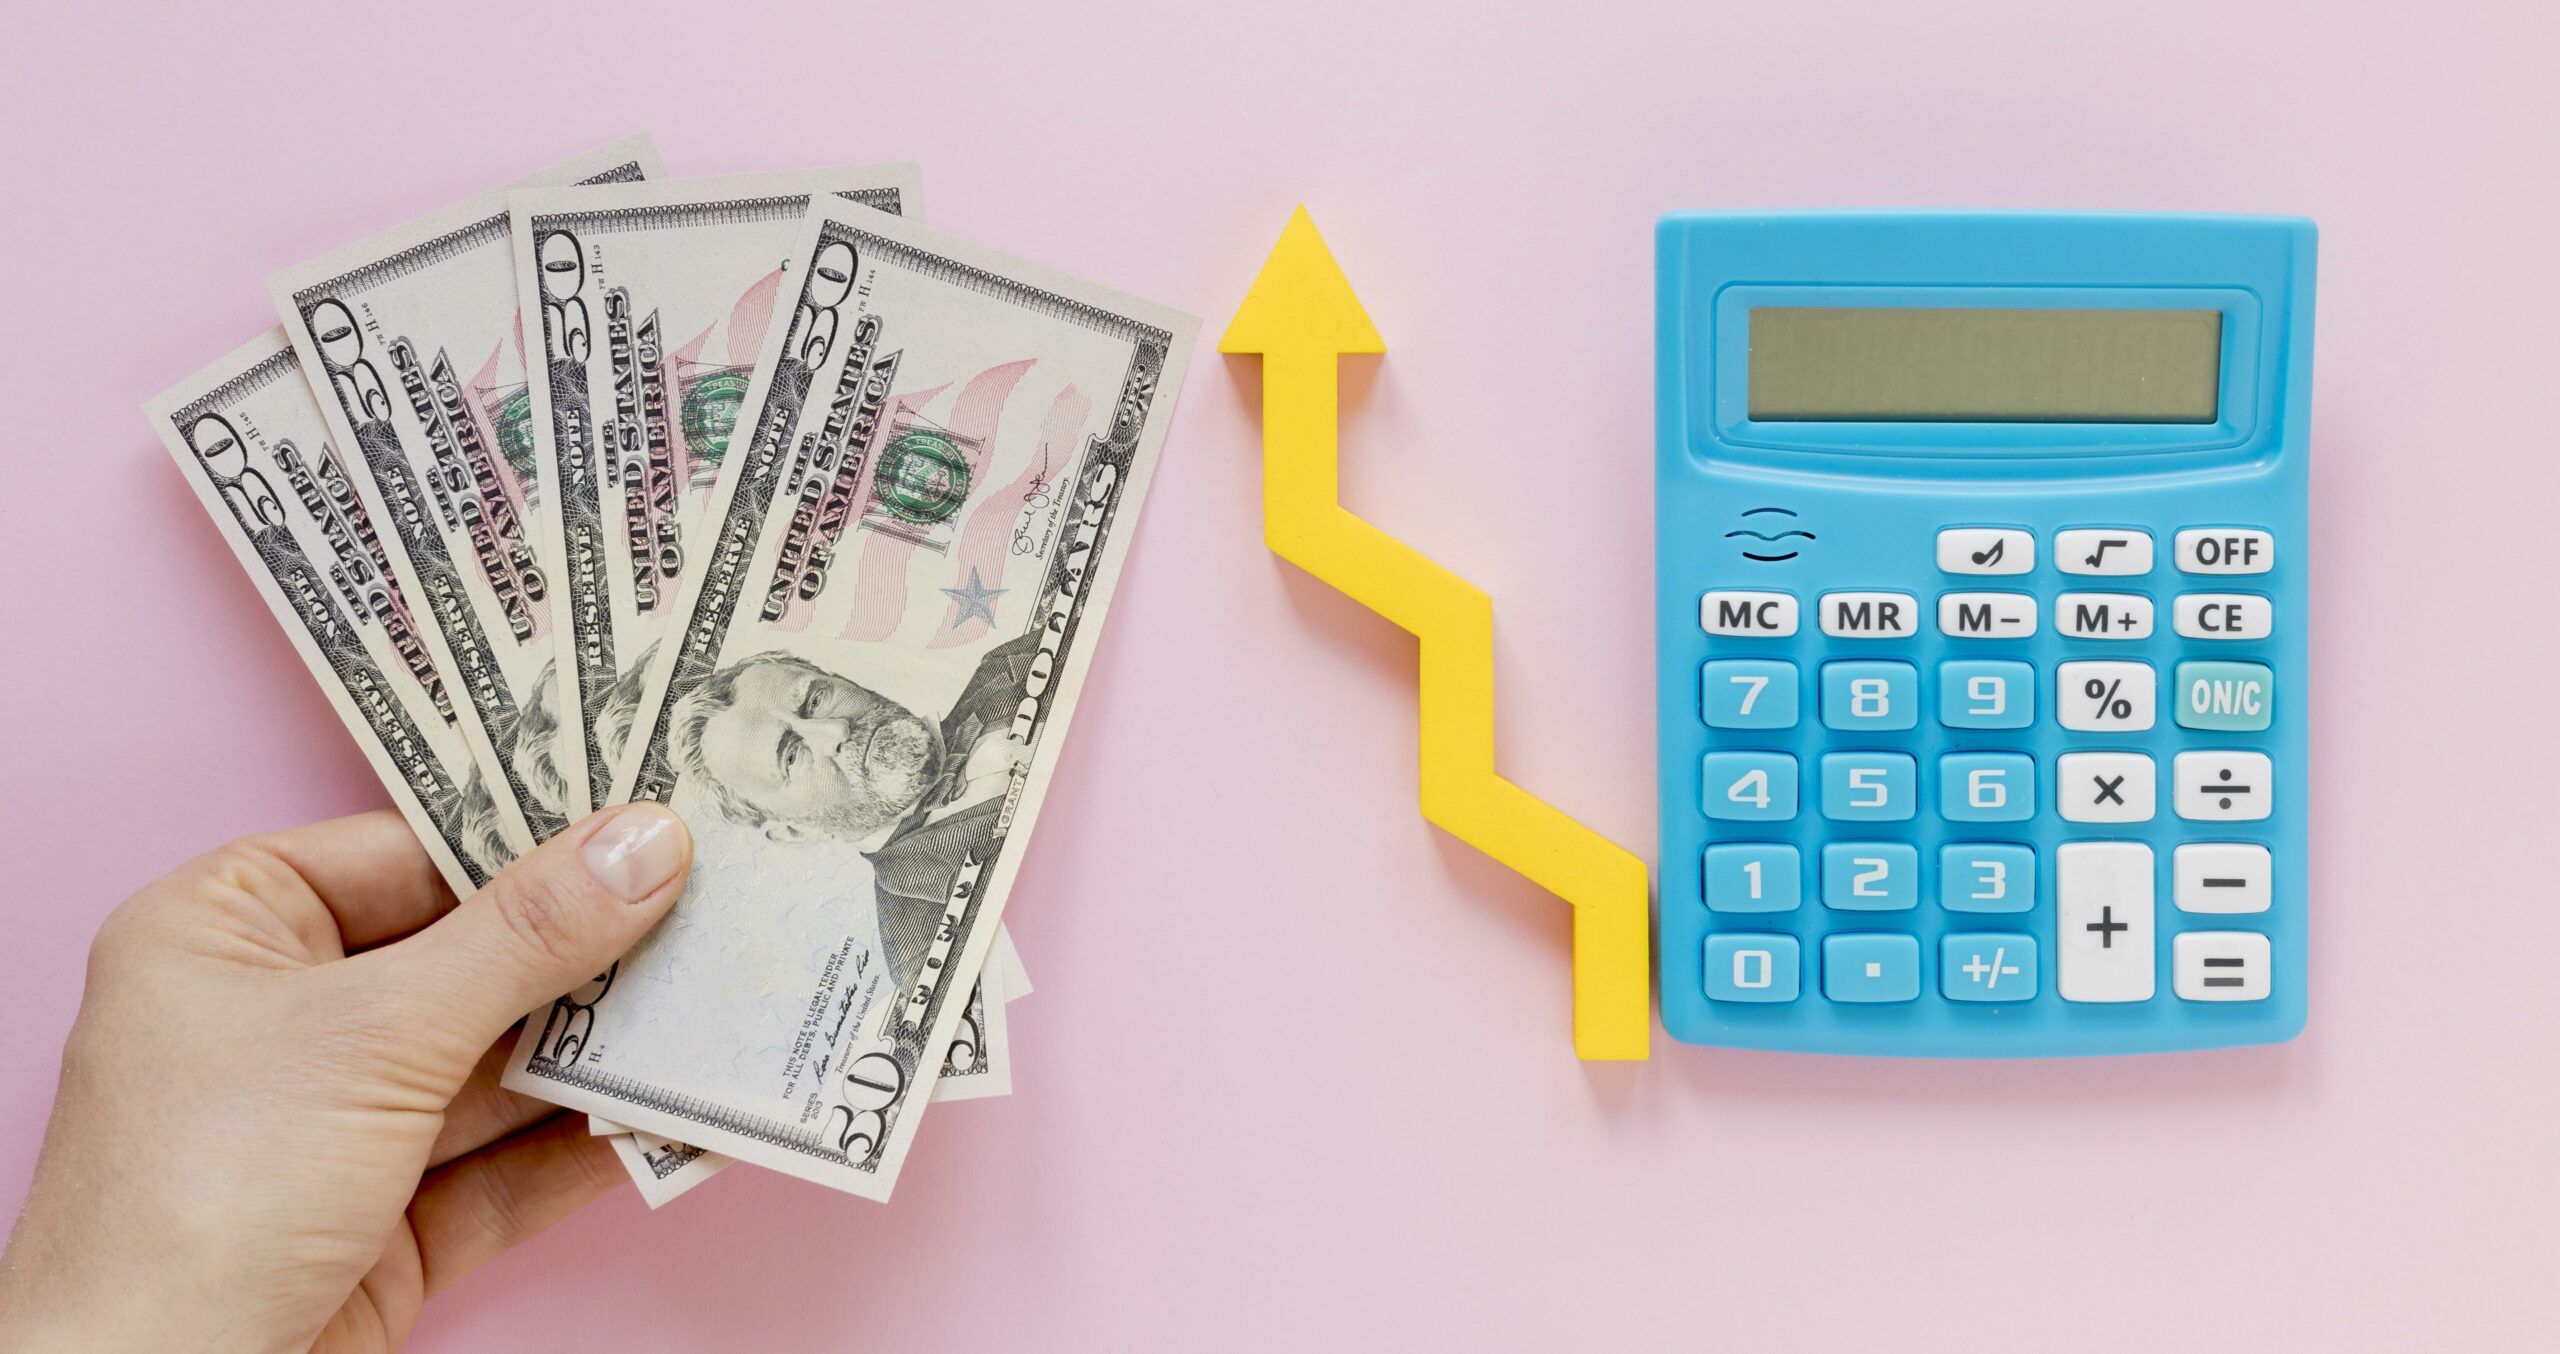 Cash next to an arrow and calculator representing Amazon FBA fee increases.